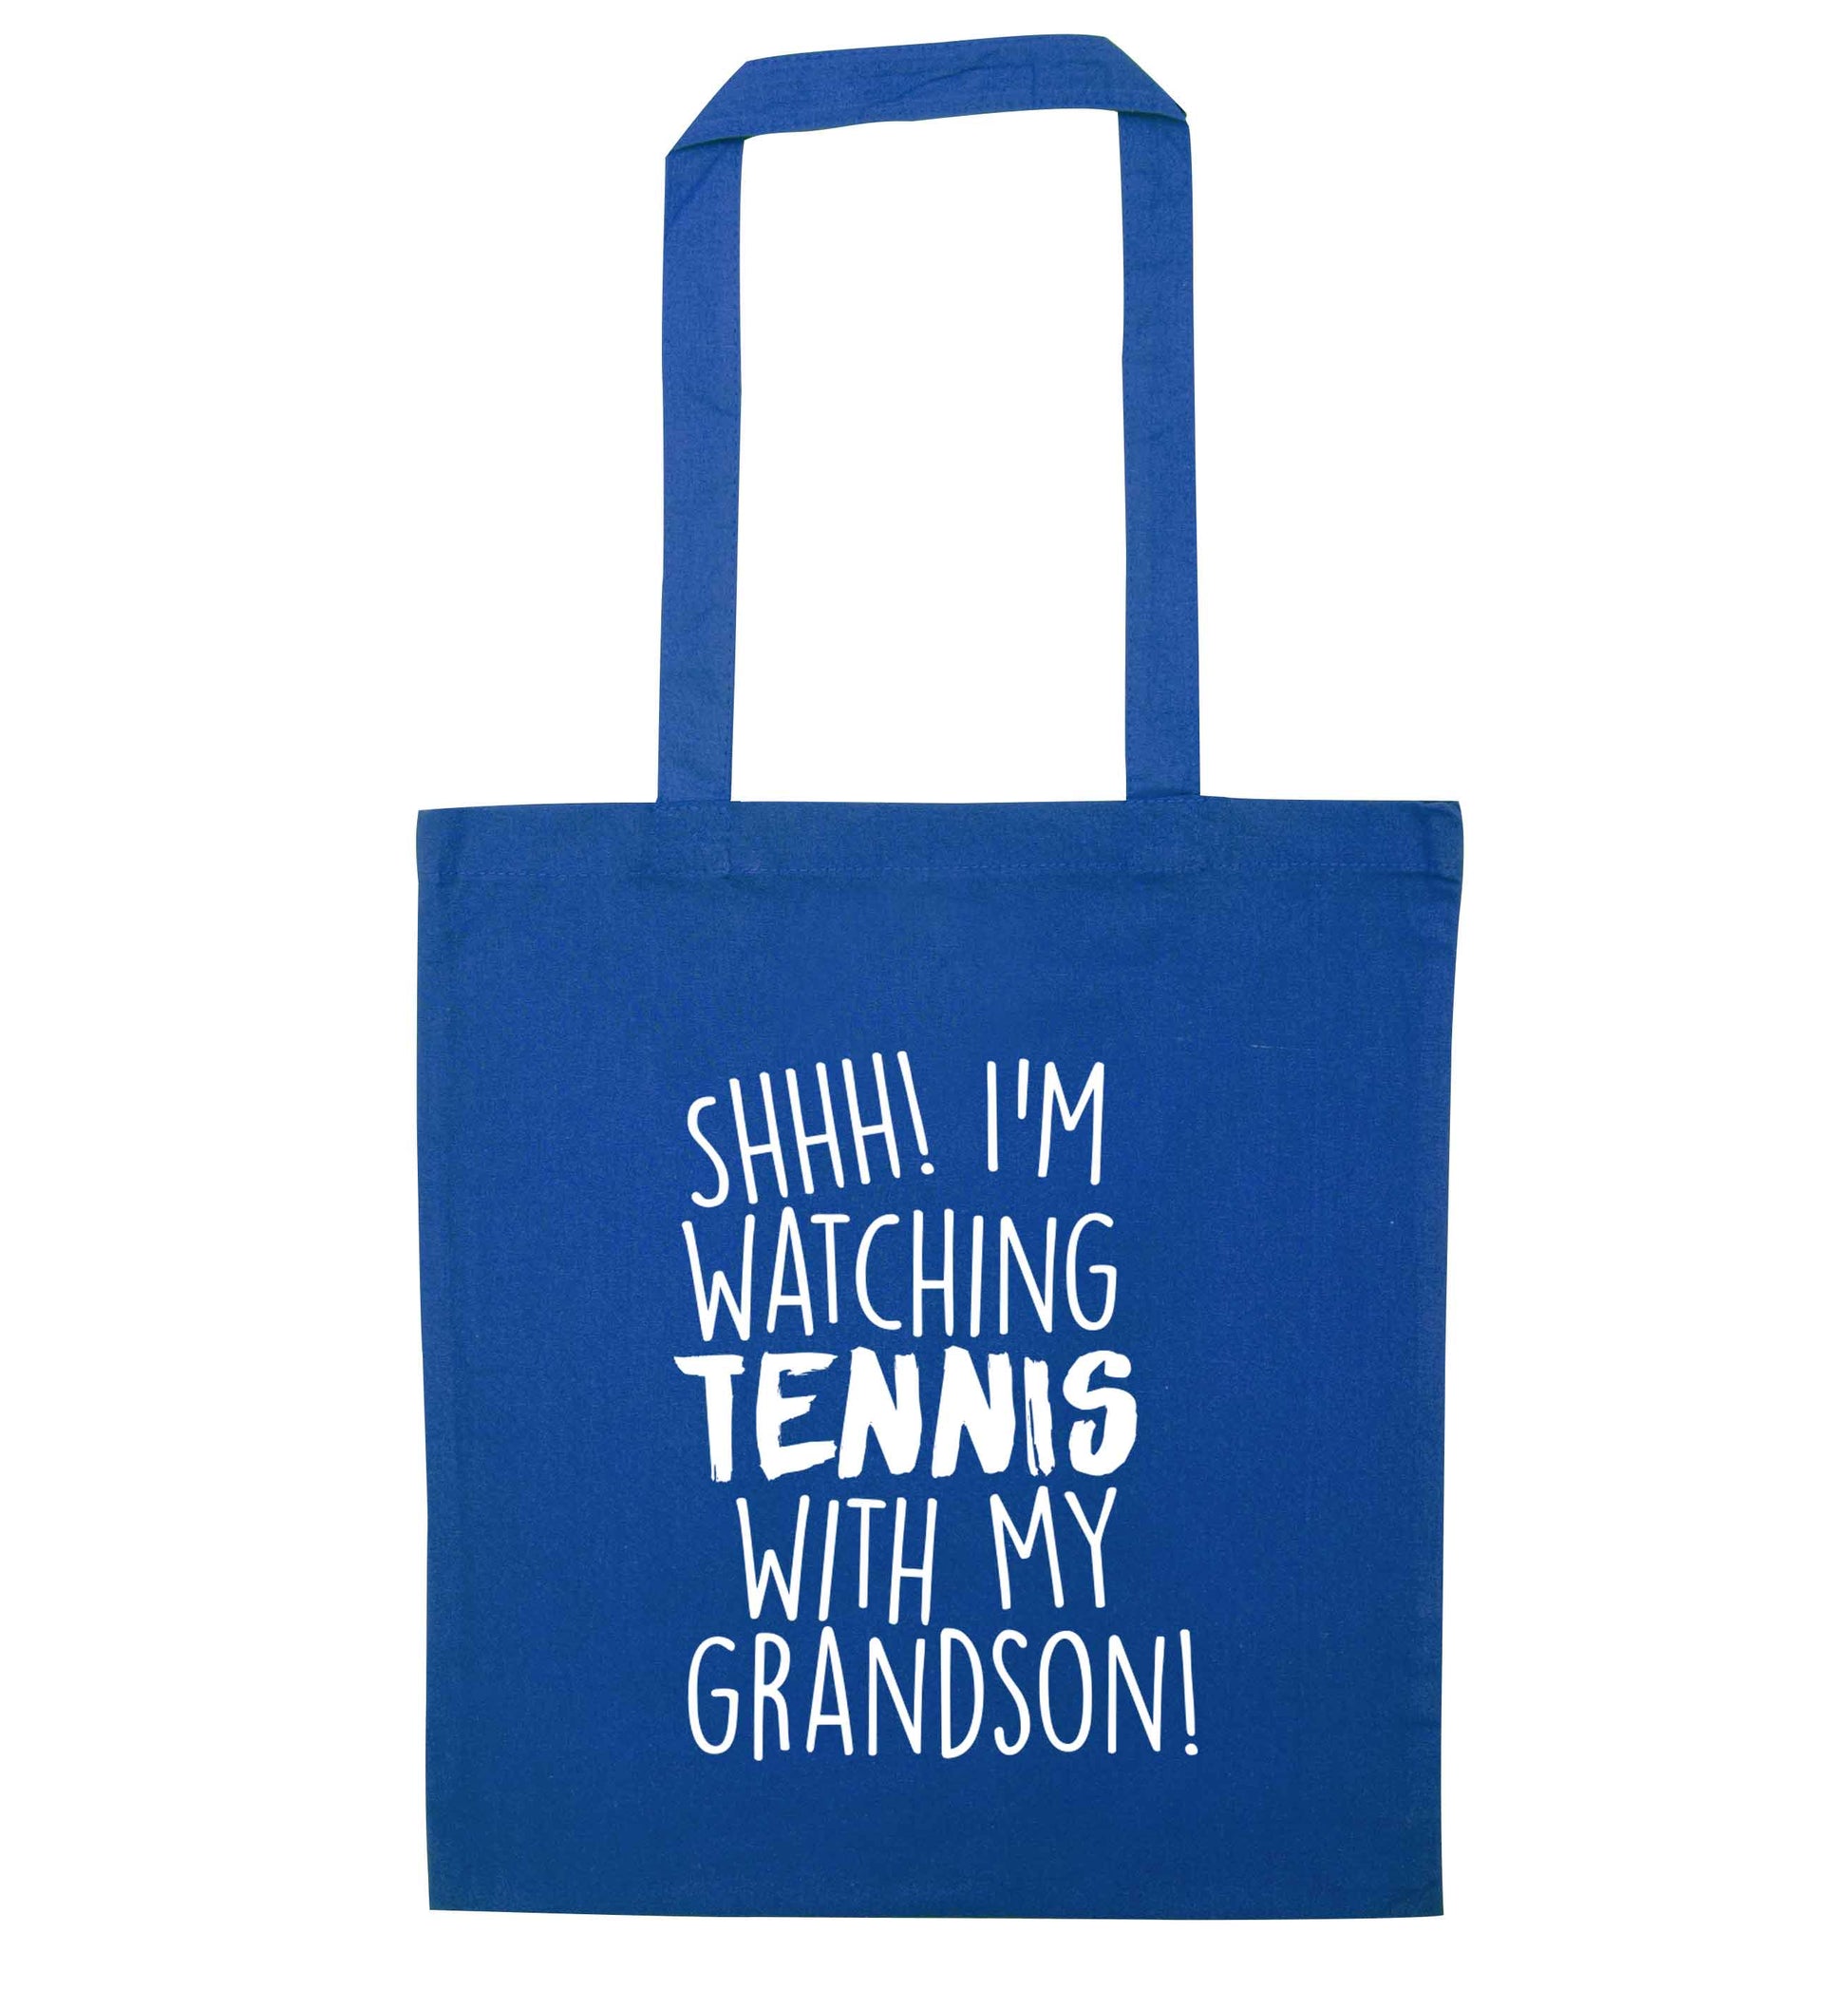 Shh! I'm watching tennis with my grandson! blue tote bag